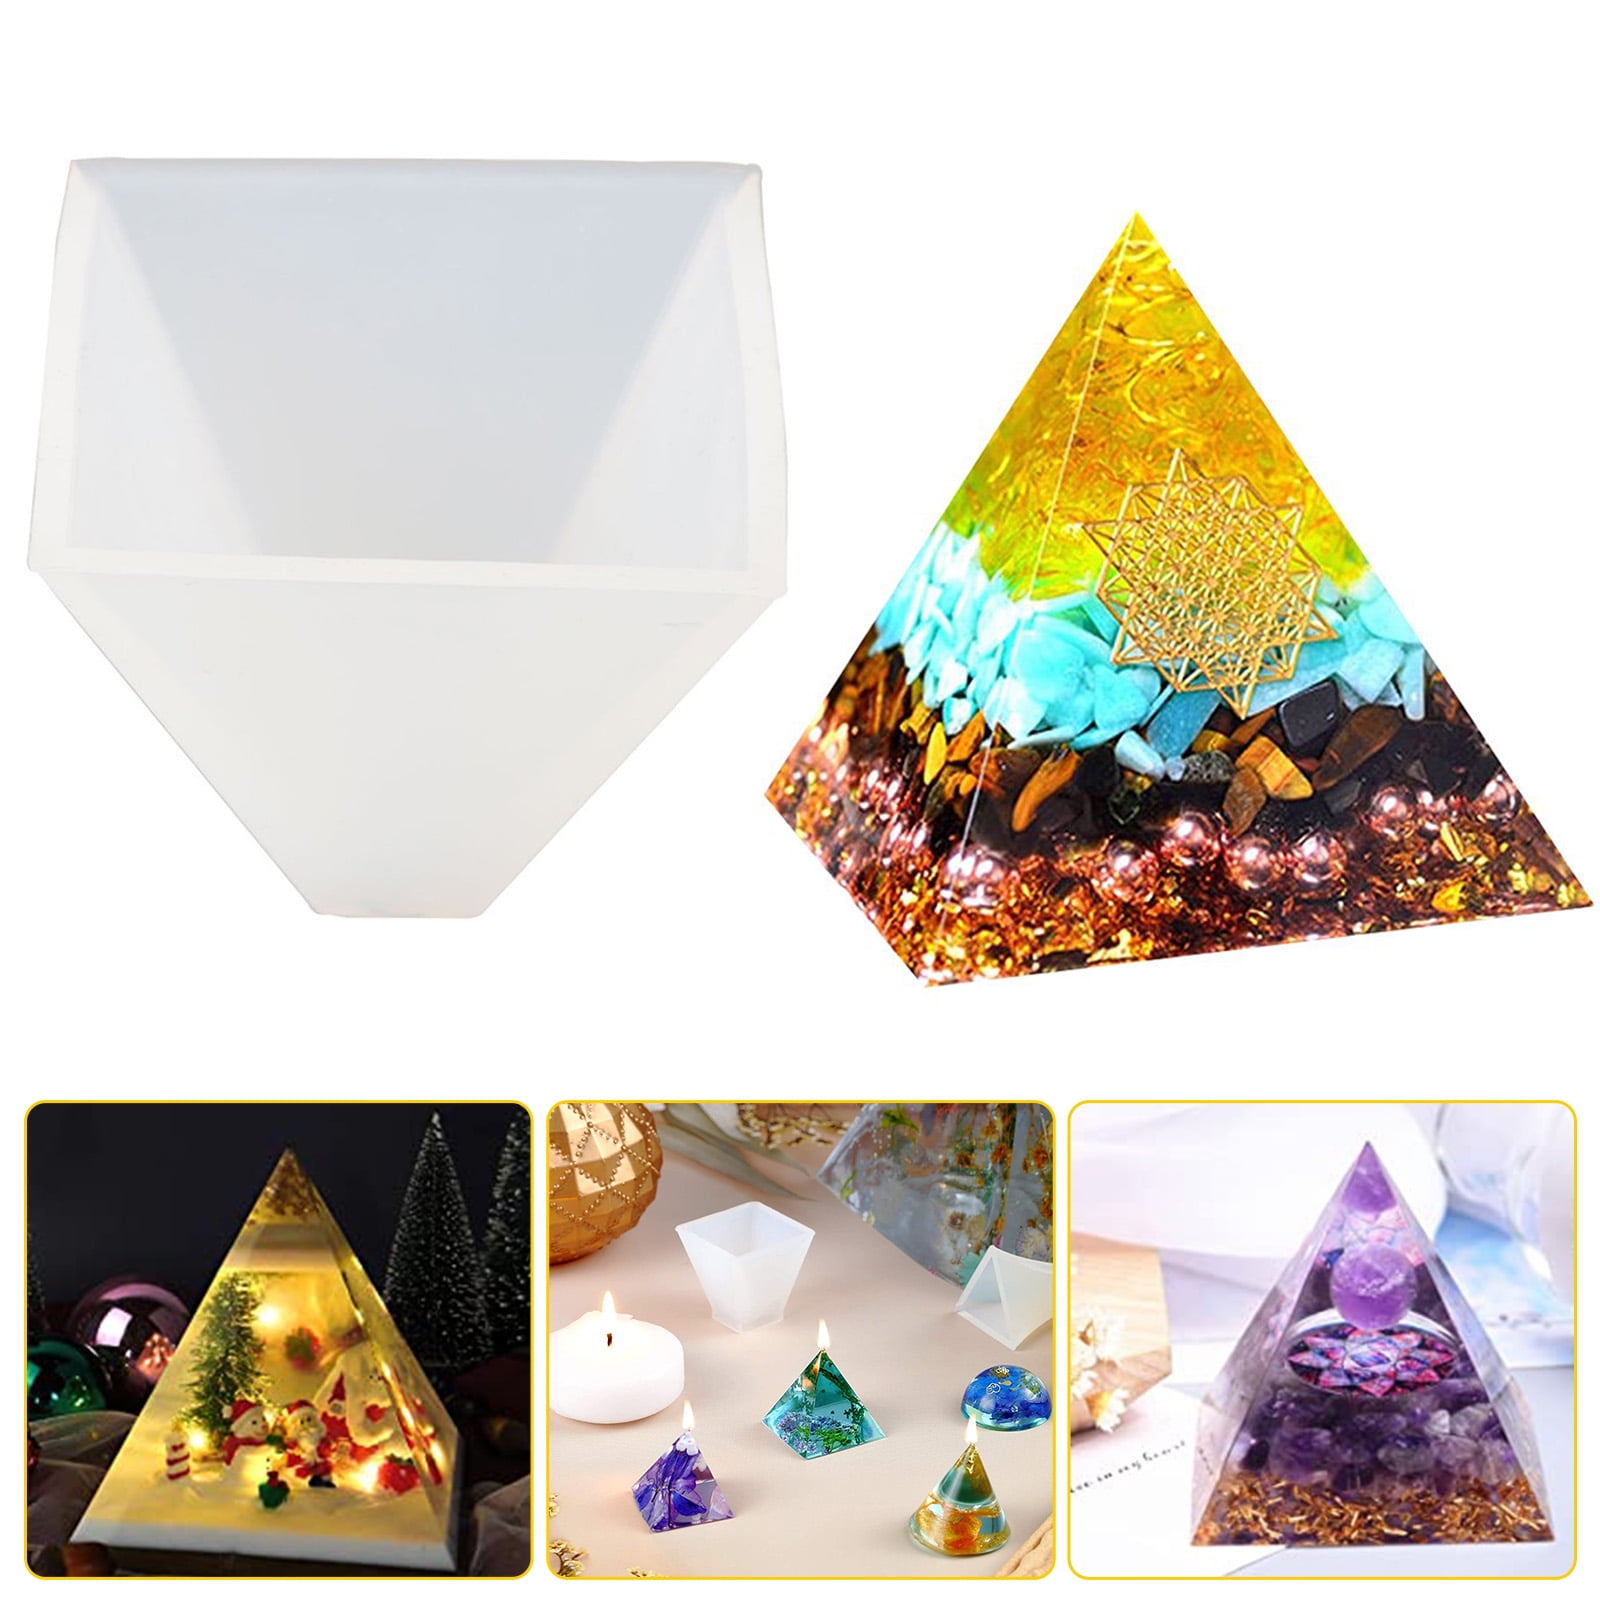 Voyyphixa 3 PCS Pyramid Molds for Resin, Silicone Casting Molds for Resin  Pyramid Epoxy Resin Molds for DIY Orgonite Jewelry Paperweight Home Table